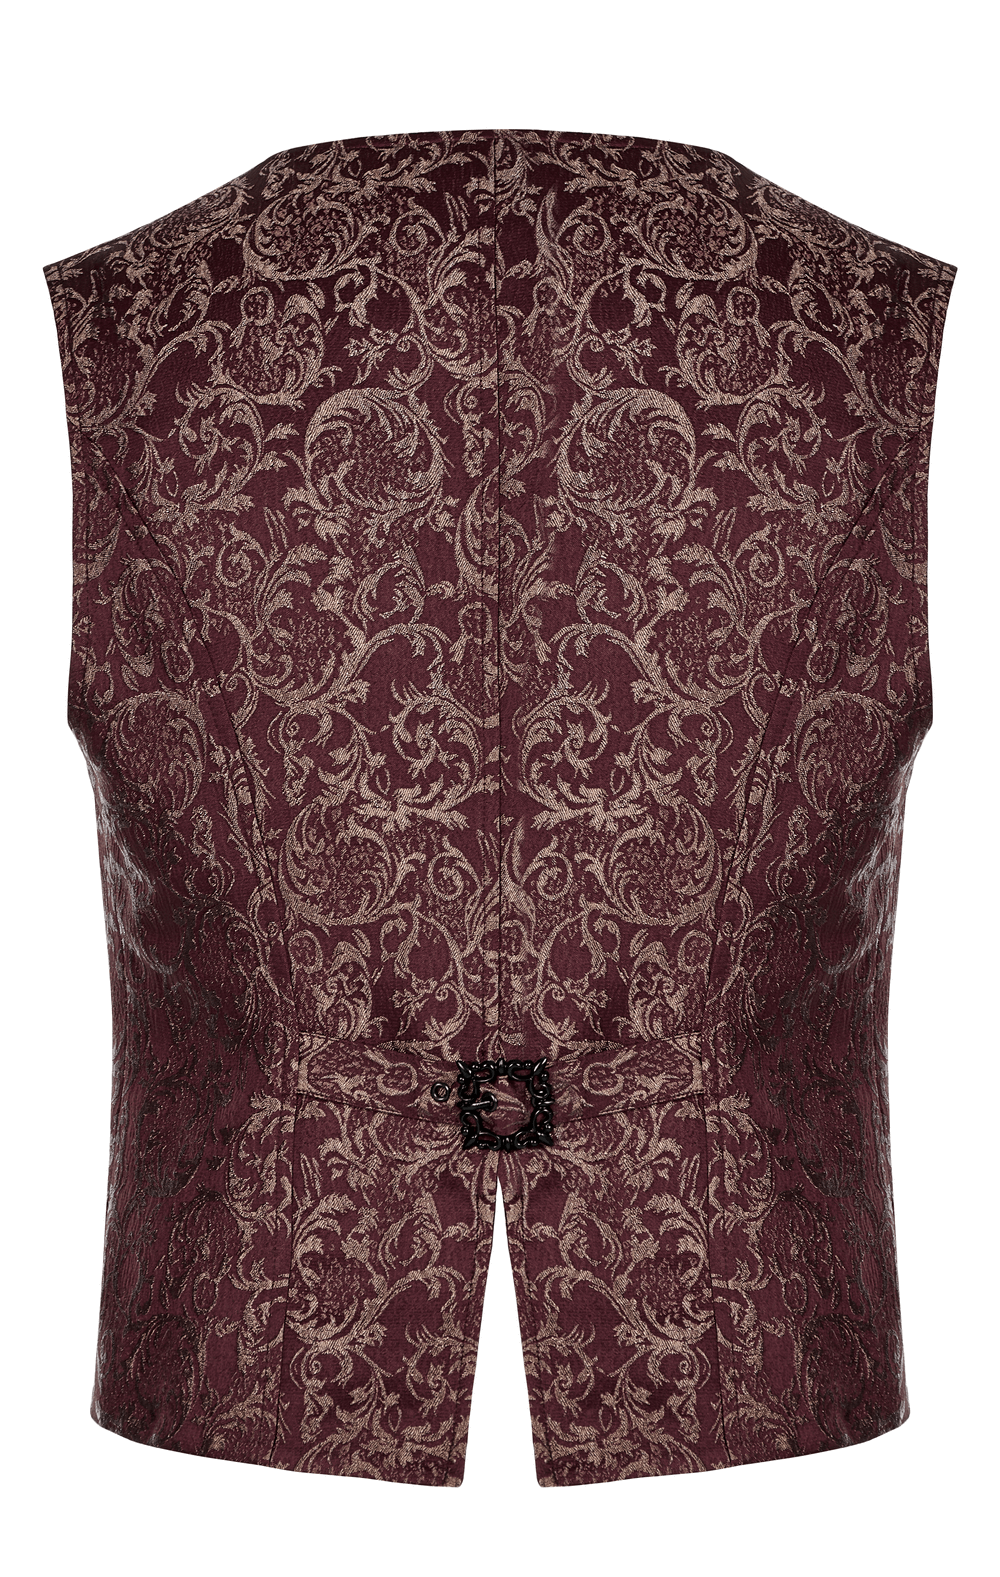 Victorian Elegance Jacquard Goth Waistcoat With Buttons - HARD'N'HEAVY